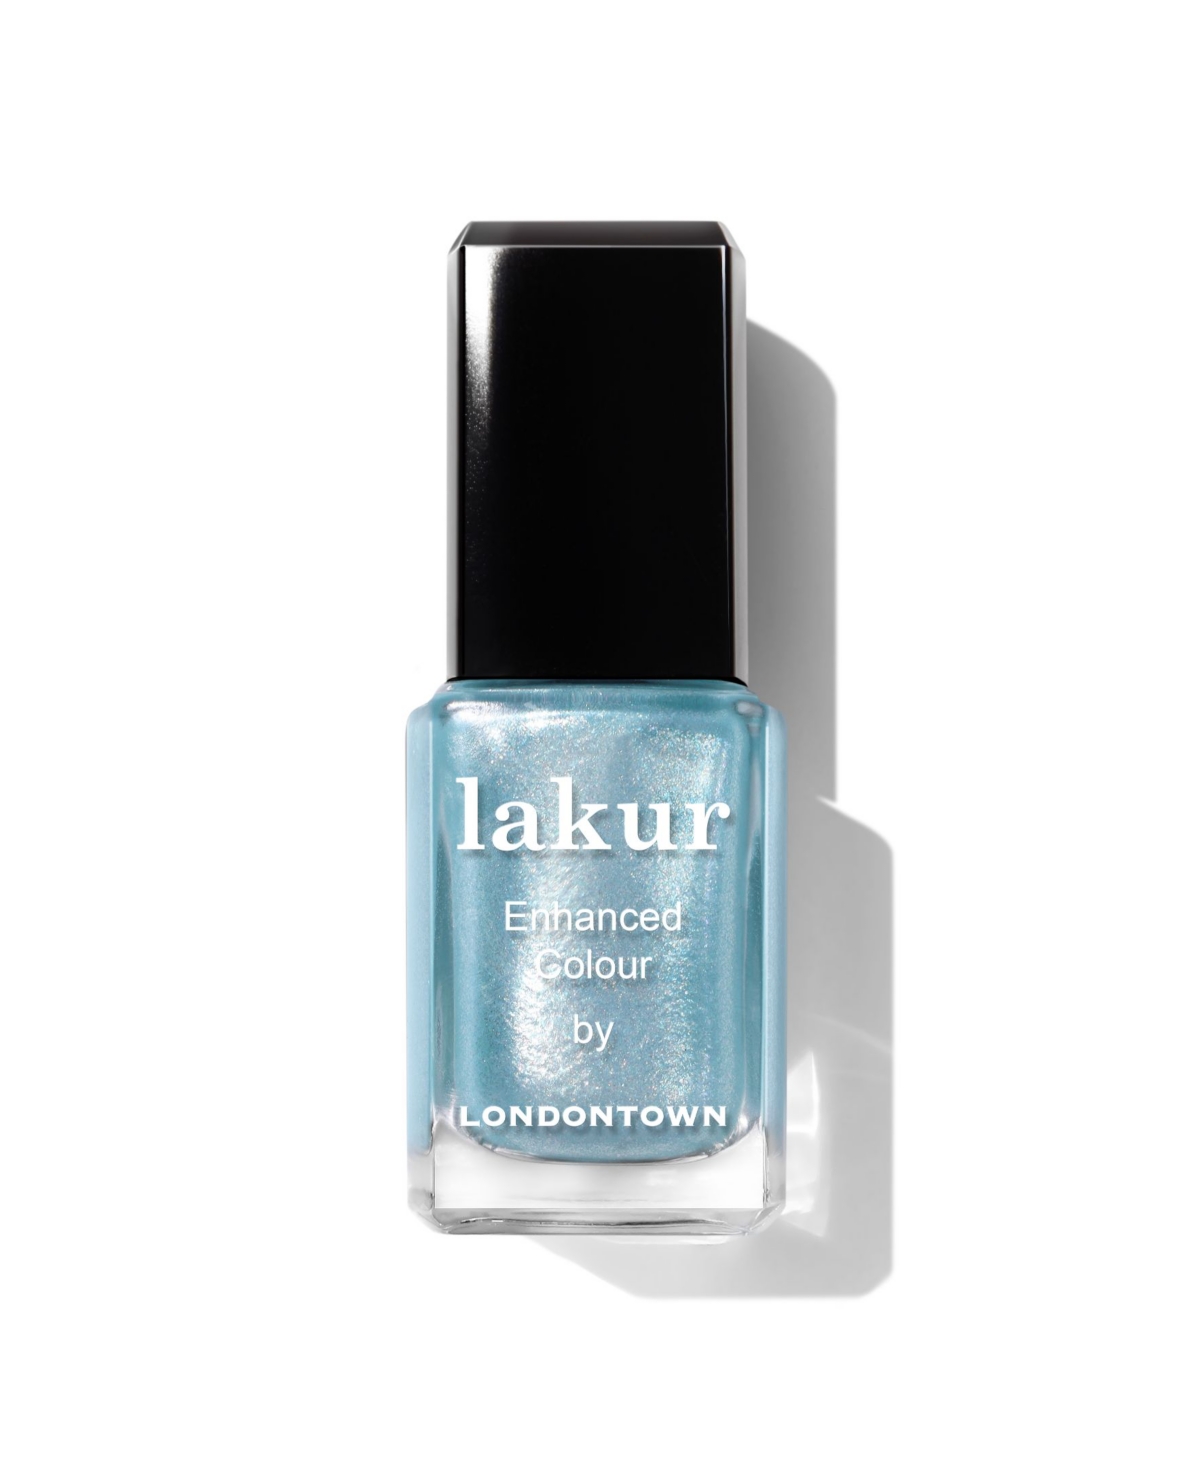 Londontown Lakur Enhanced Color Nail Polish, 0.4 Oz. In Whipped Blueberry (soft Baby Blue With U